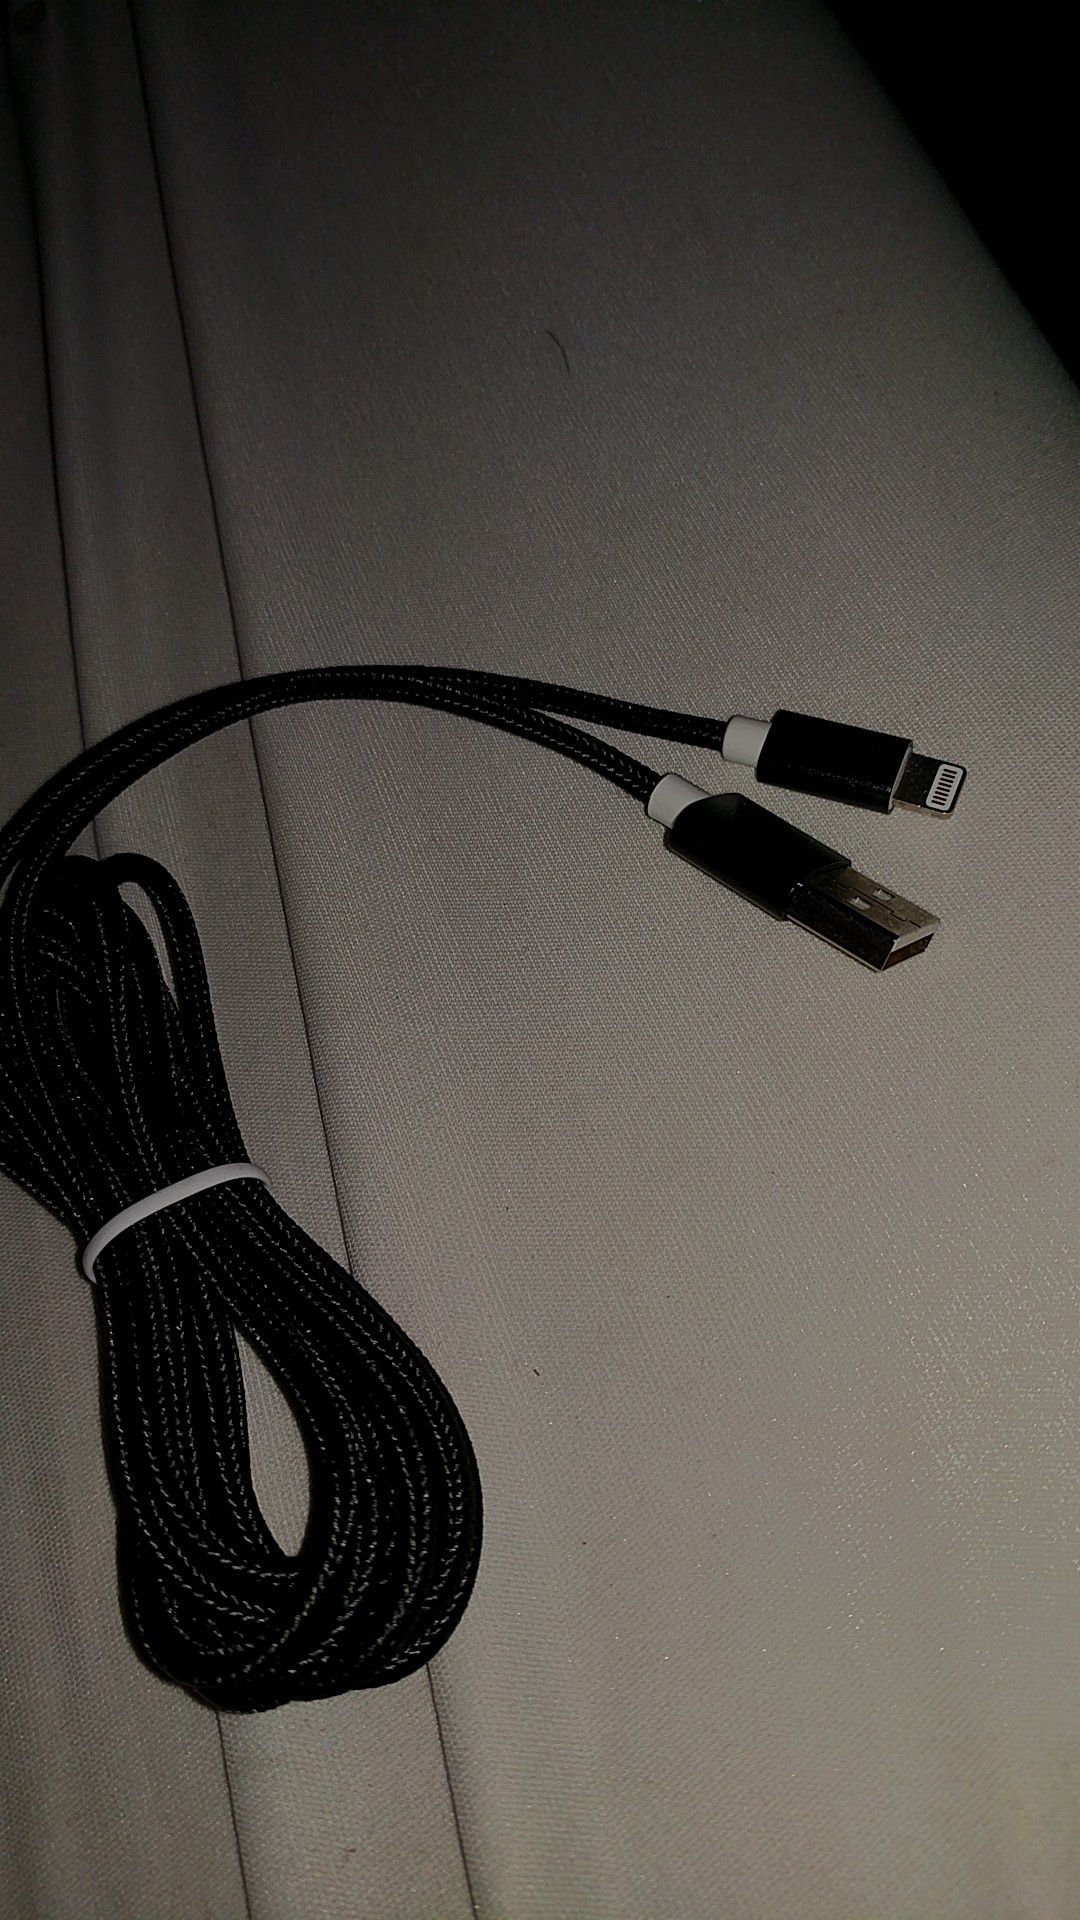 iPhone charging cables